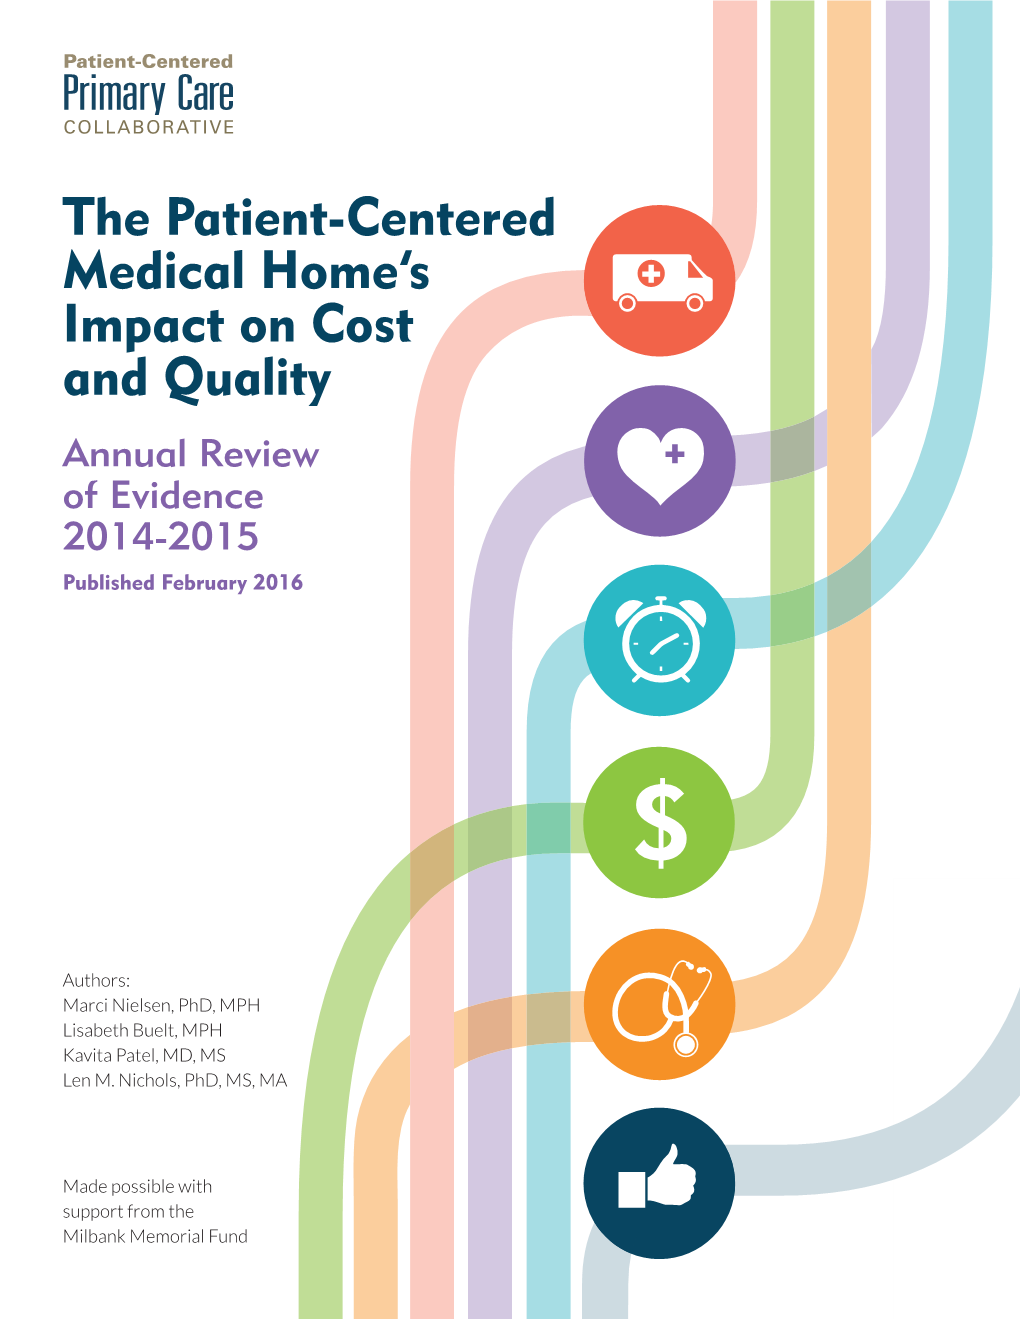 The Patient-Centered Medical Home's Impact on Cost and Quality